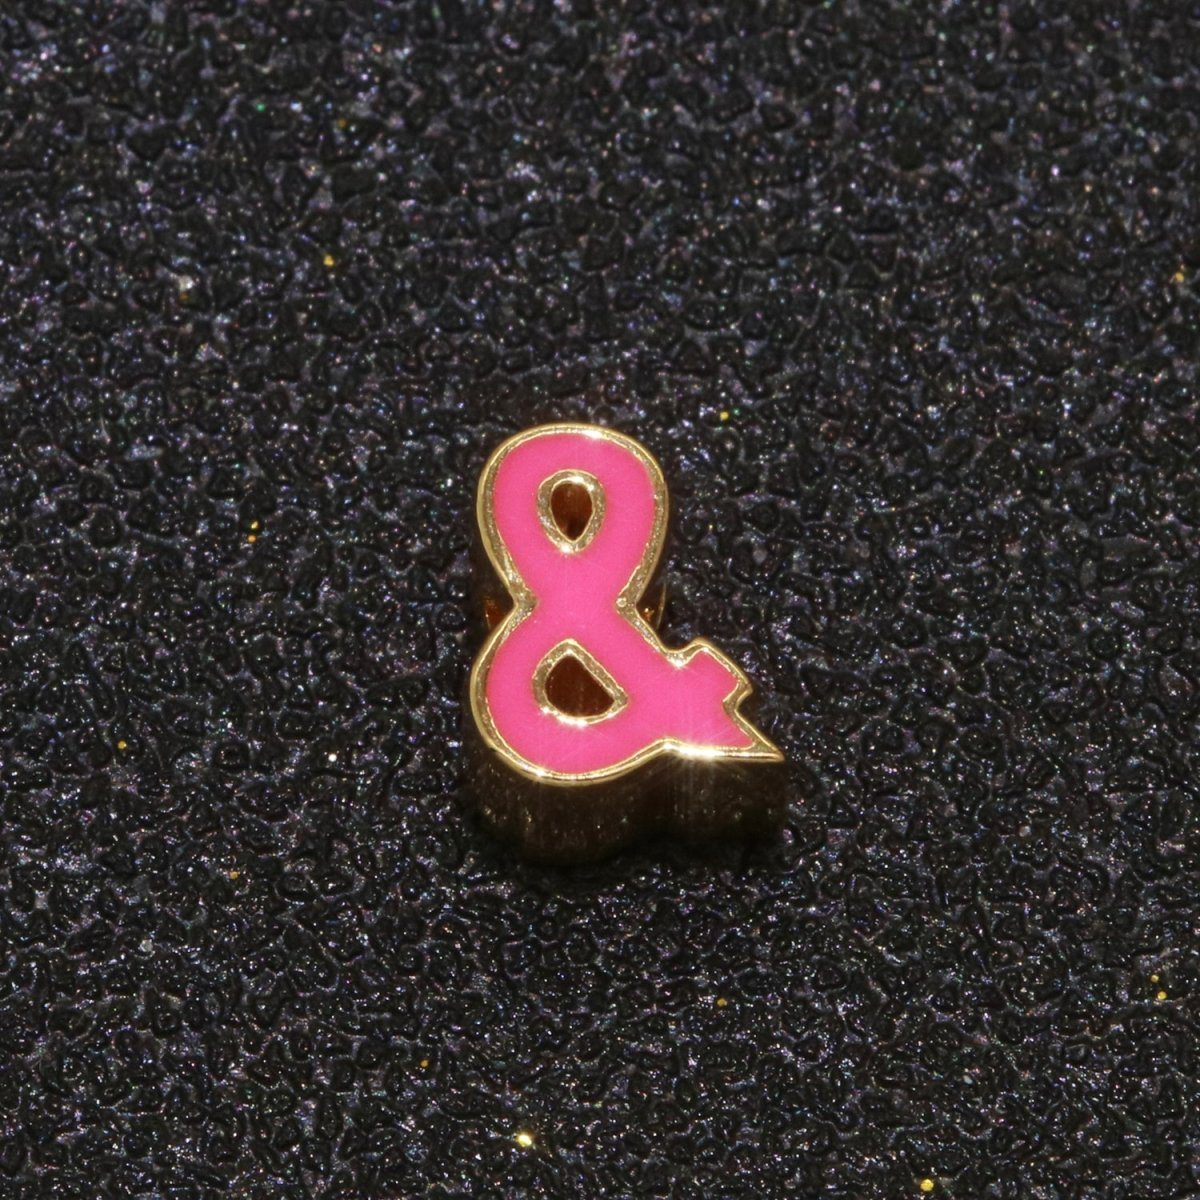 Gold Enamel Spacer Beads, Symbol Beads, Ampersand Beads Heart Star Pink Red Enamel Beads for Bracelet Necklace Component 8mm,10mm B-516 to B-527 - DLUXCA